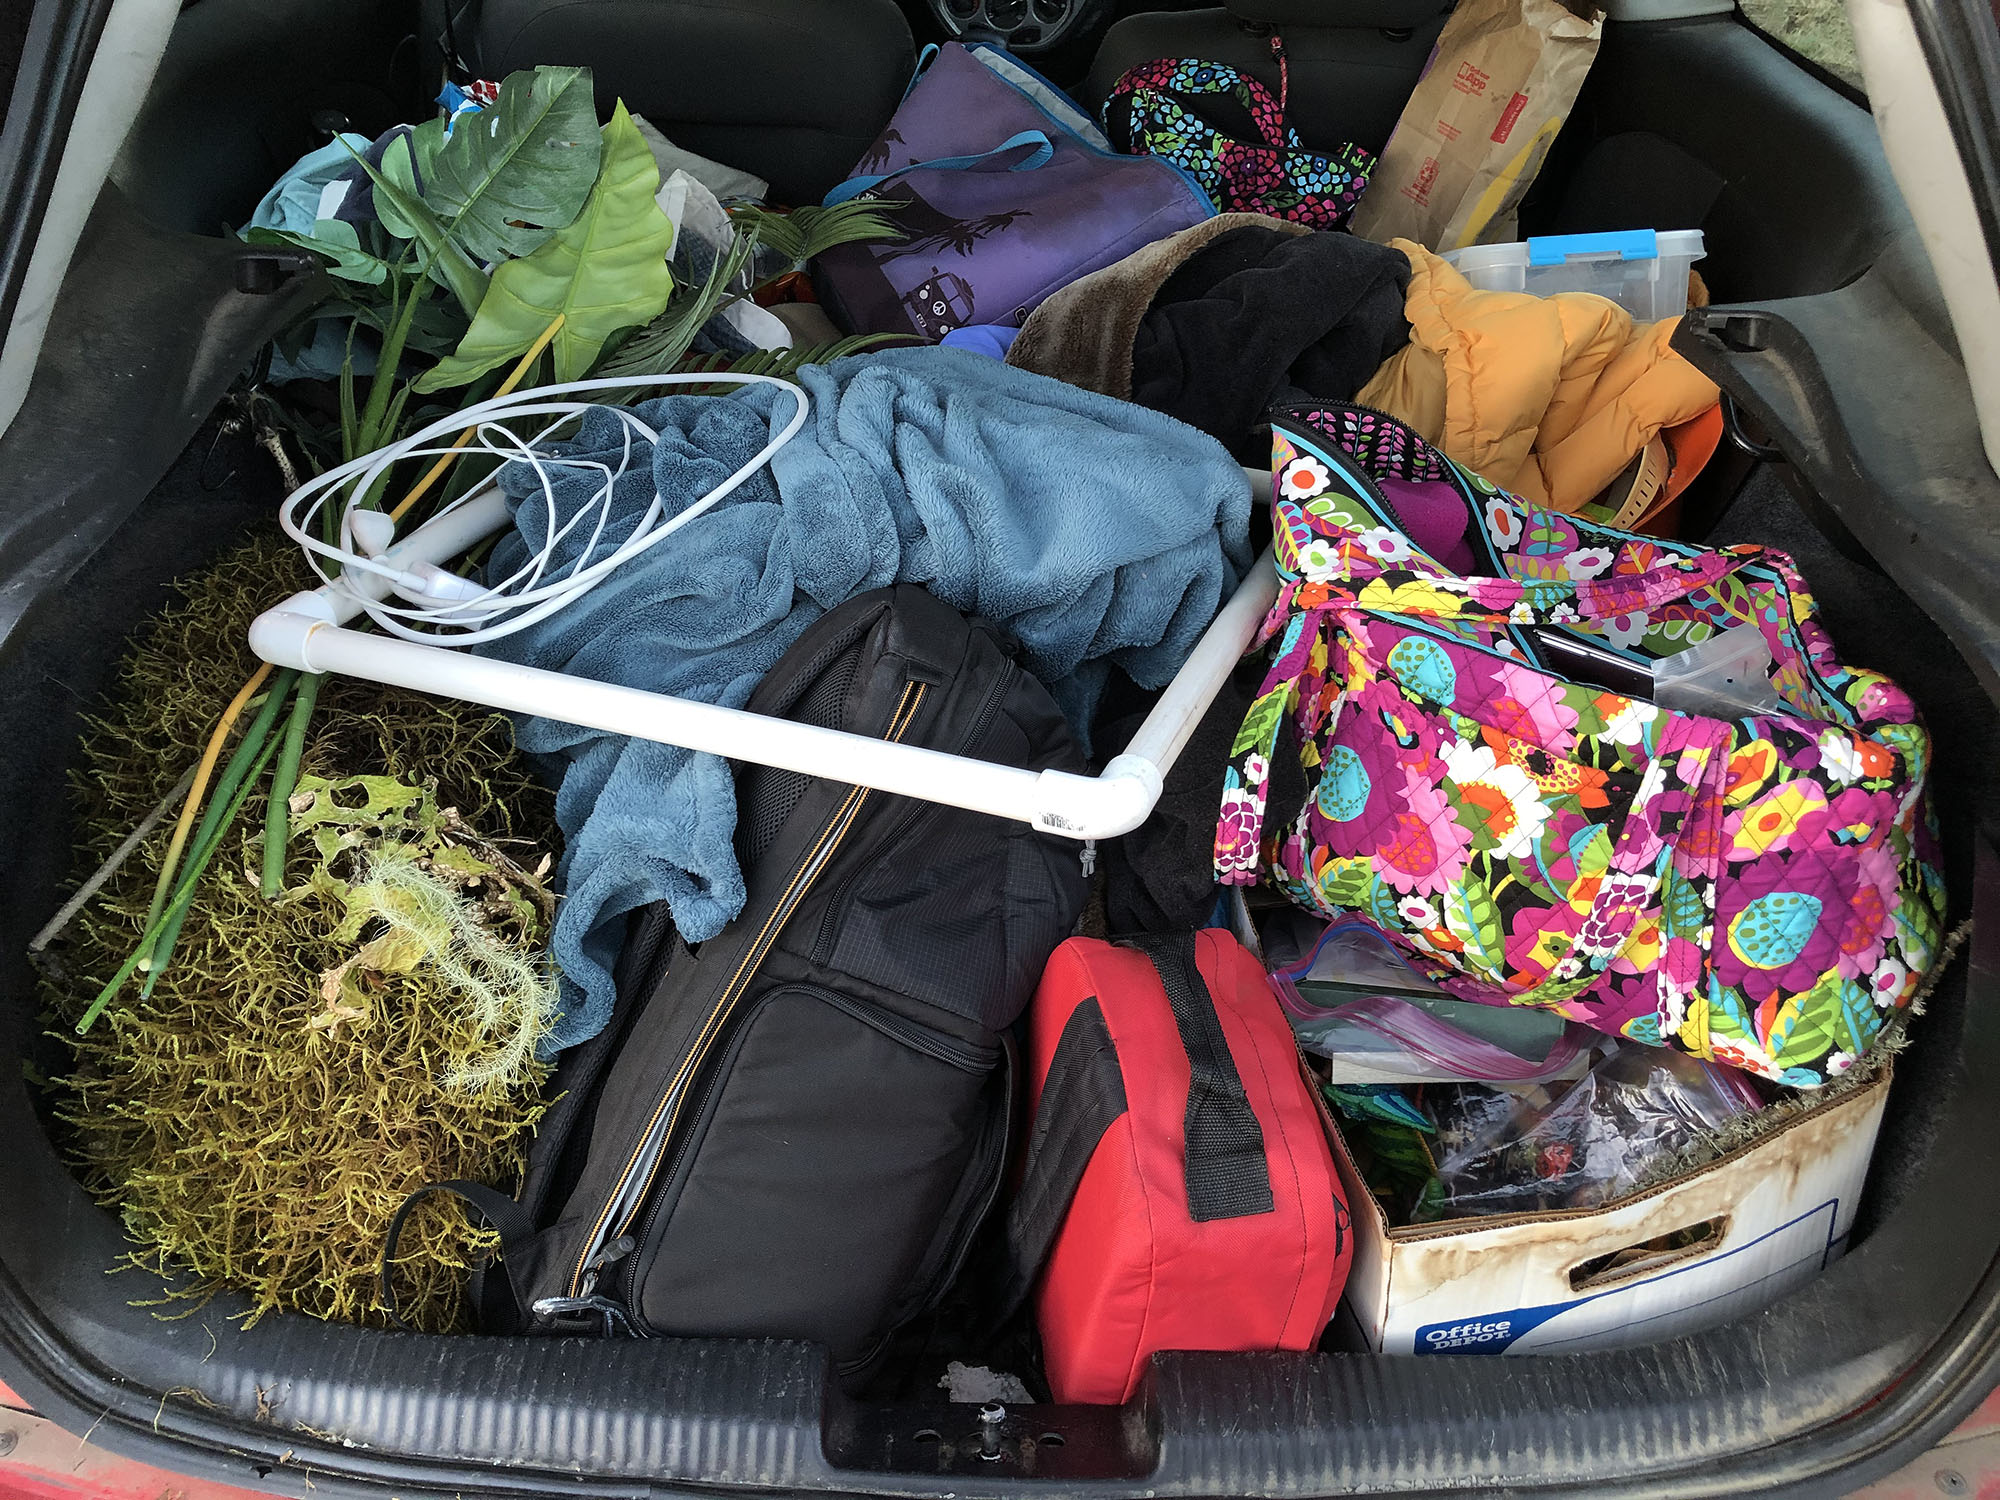 Sometimes the trunk of our "all-terrain" Ford Focus is one big pile of field gear.